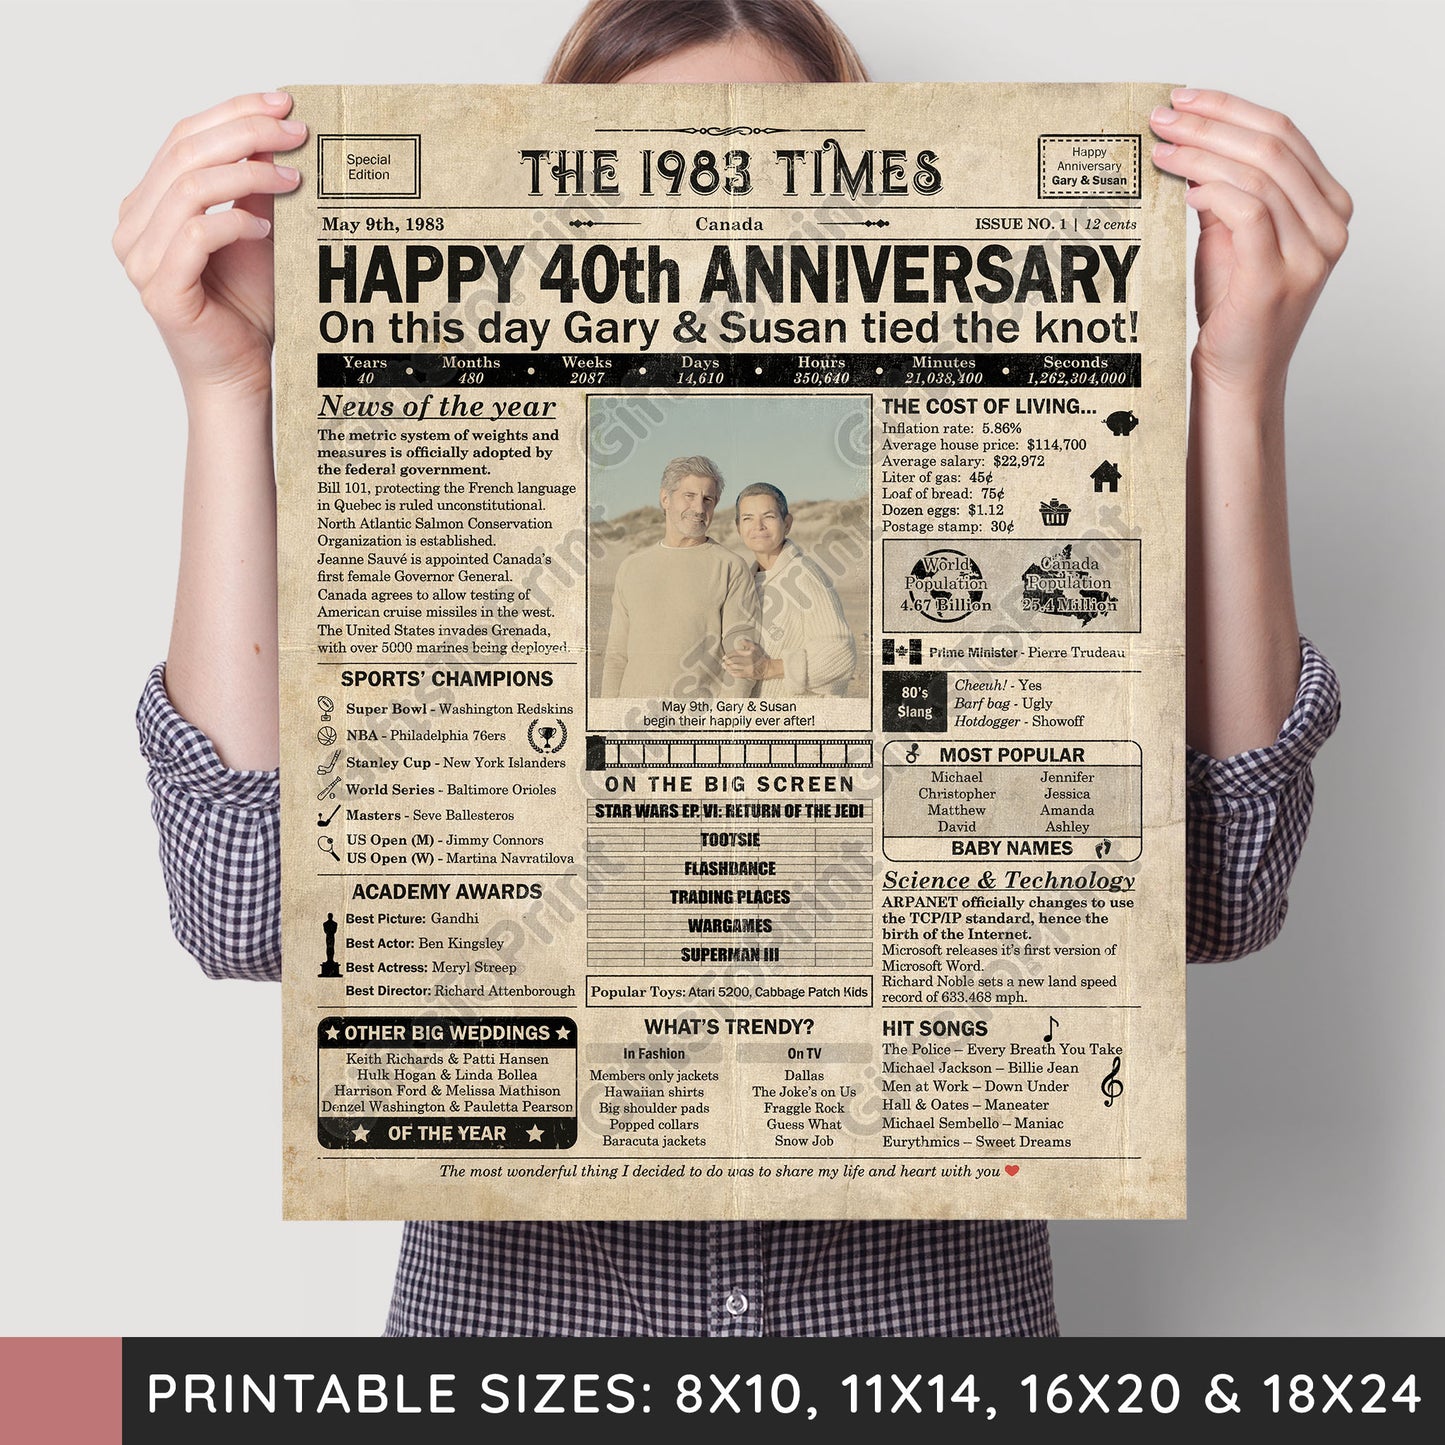 Personalized 40th Anniversary Gift: A Printable CANADIAN Newspaper Poster of 1983